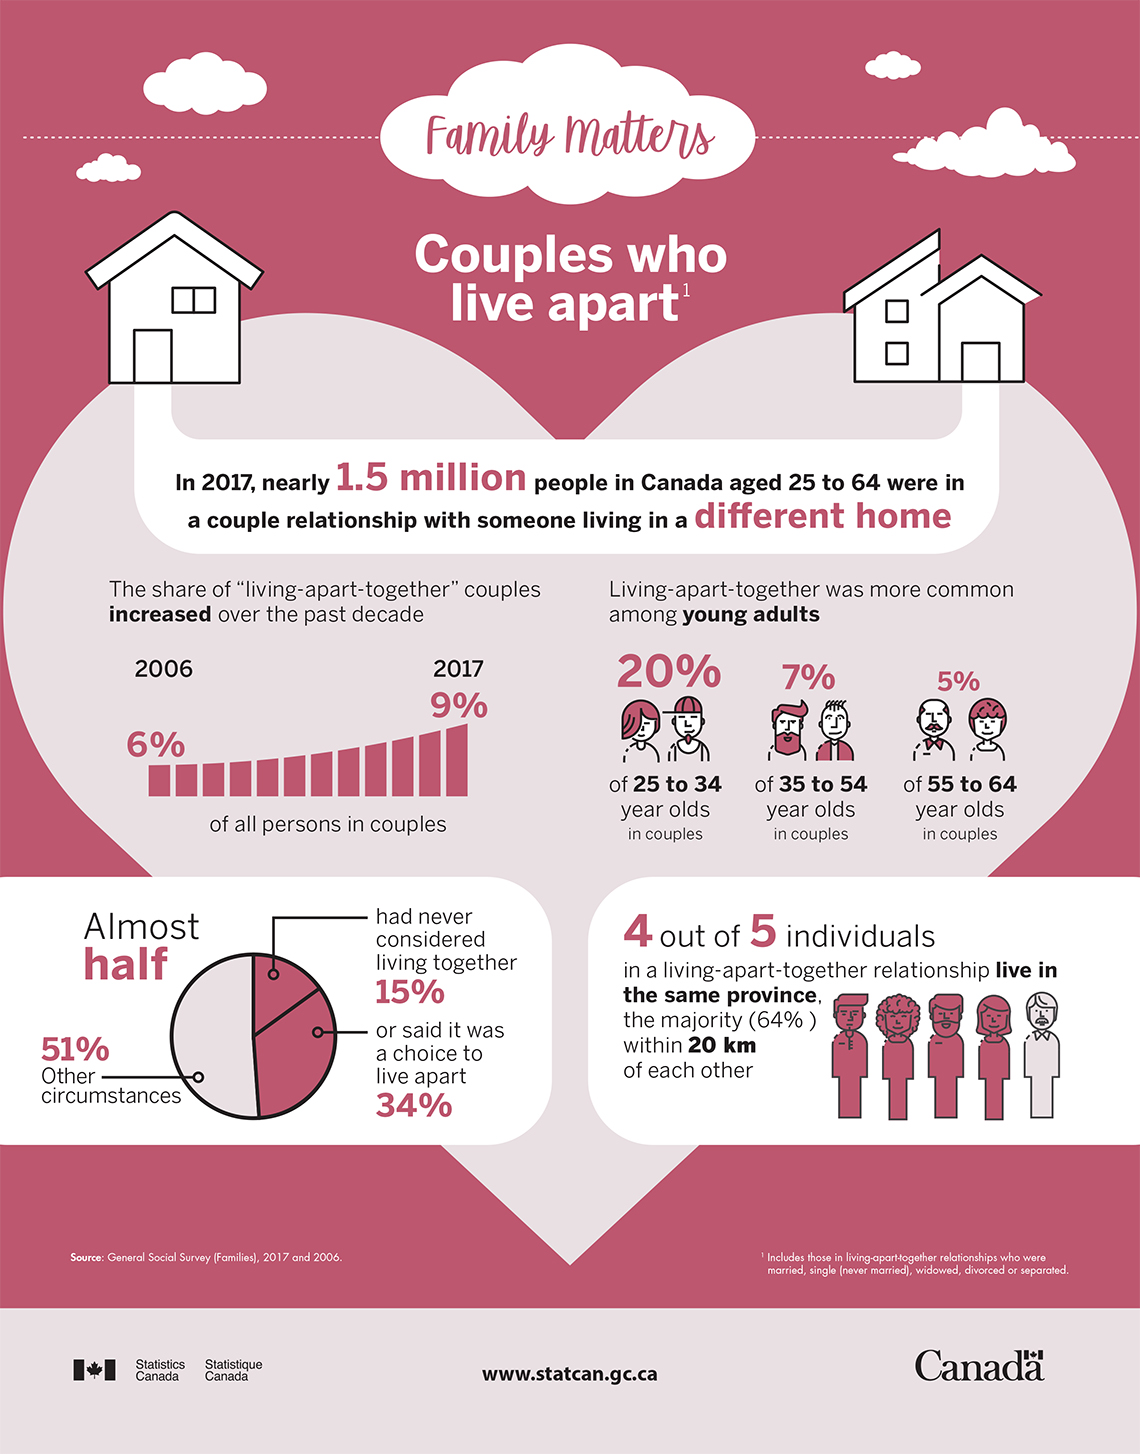 Percentage of "living-apart-together" couples. 